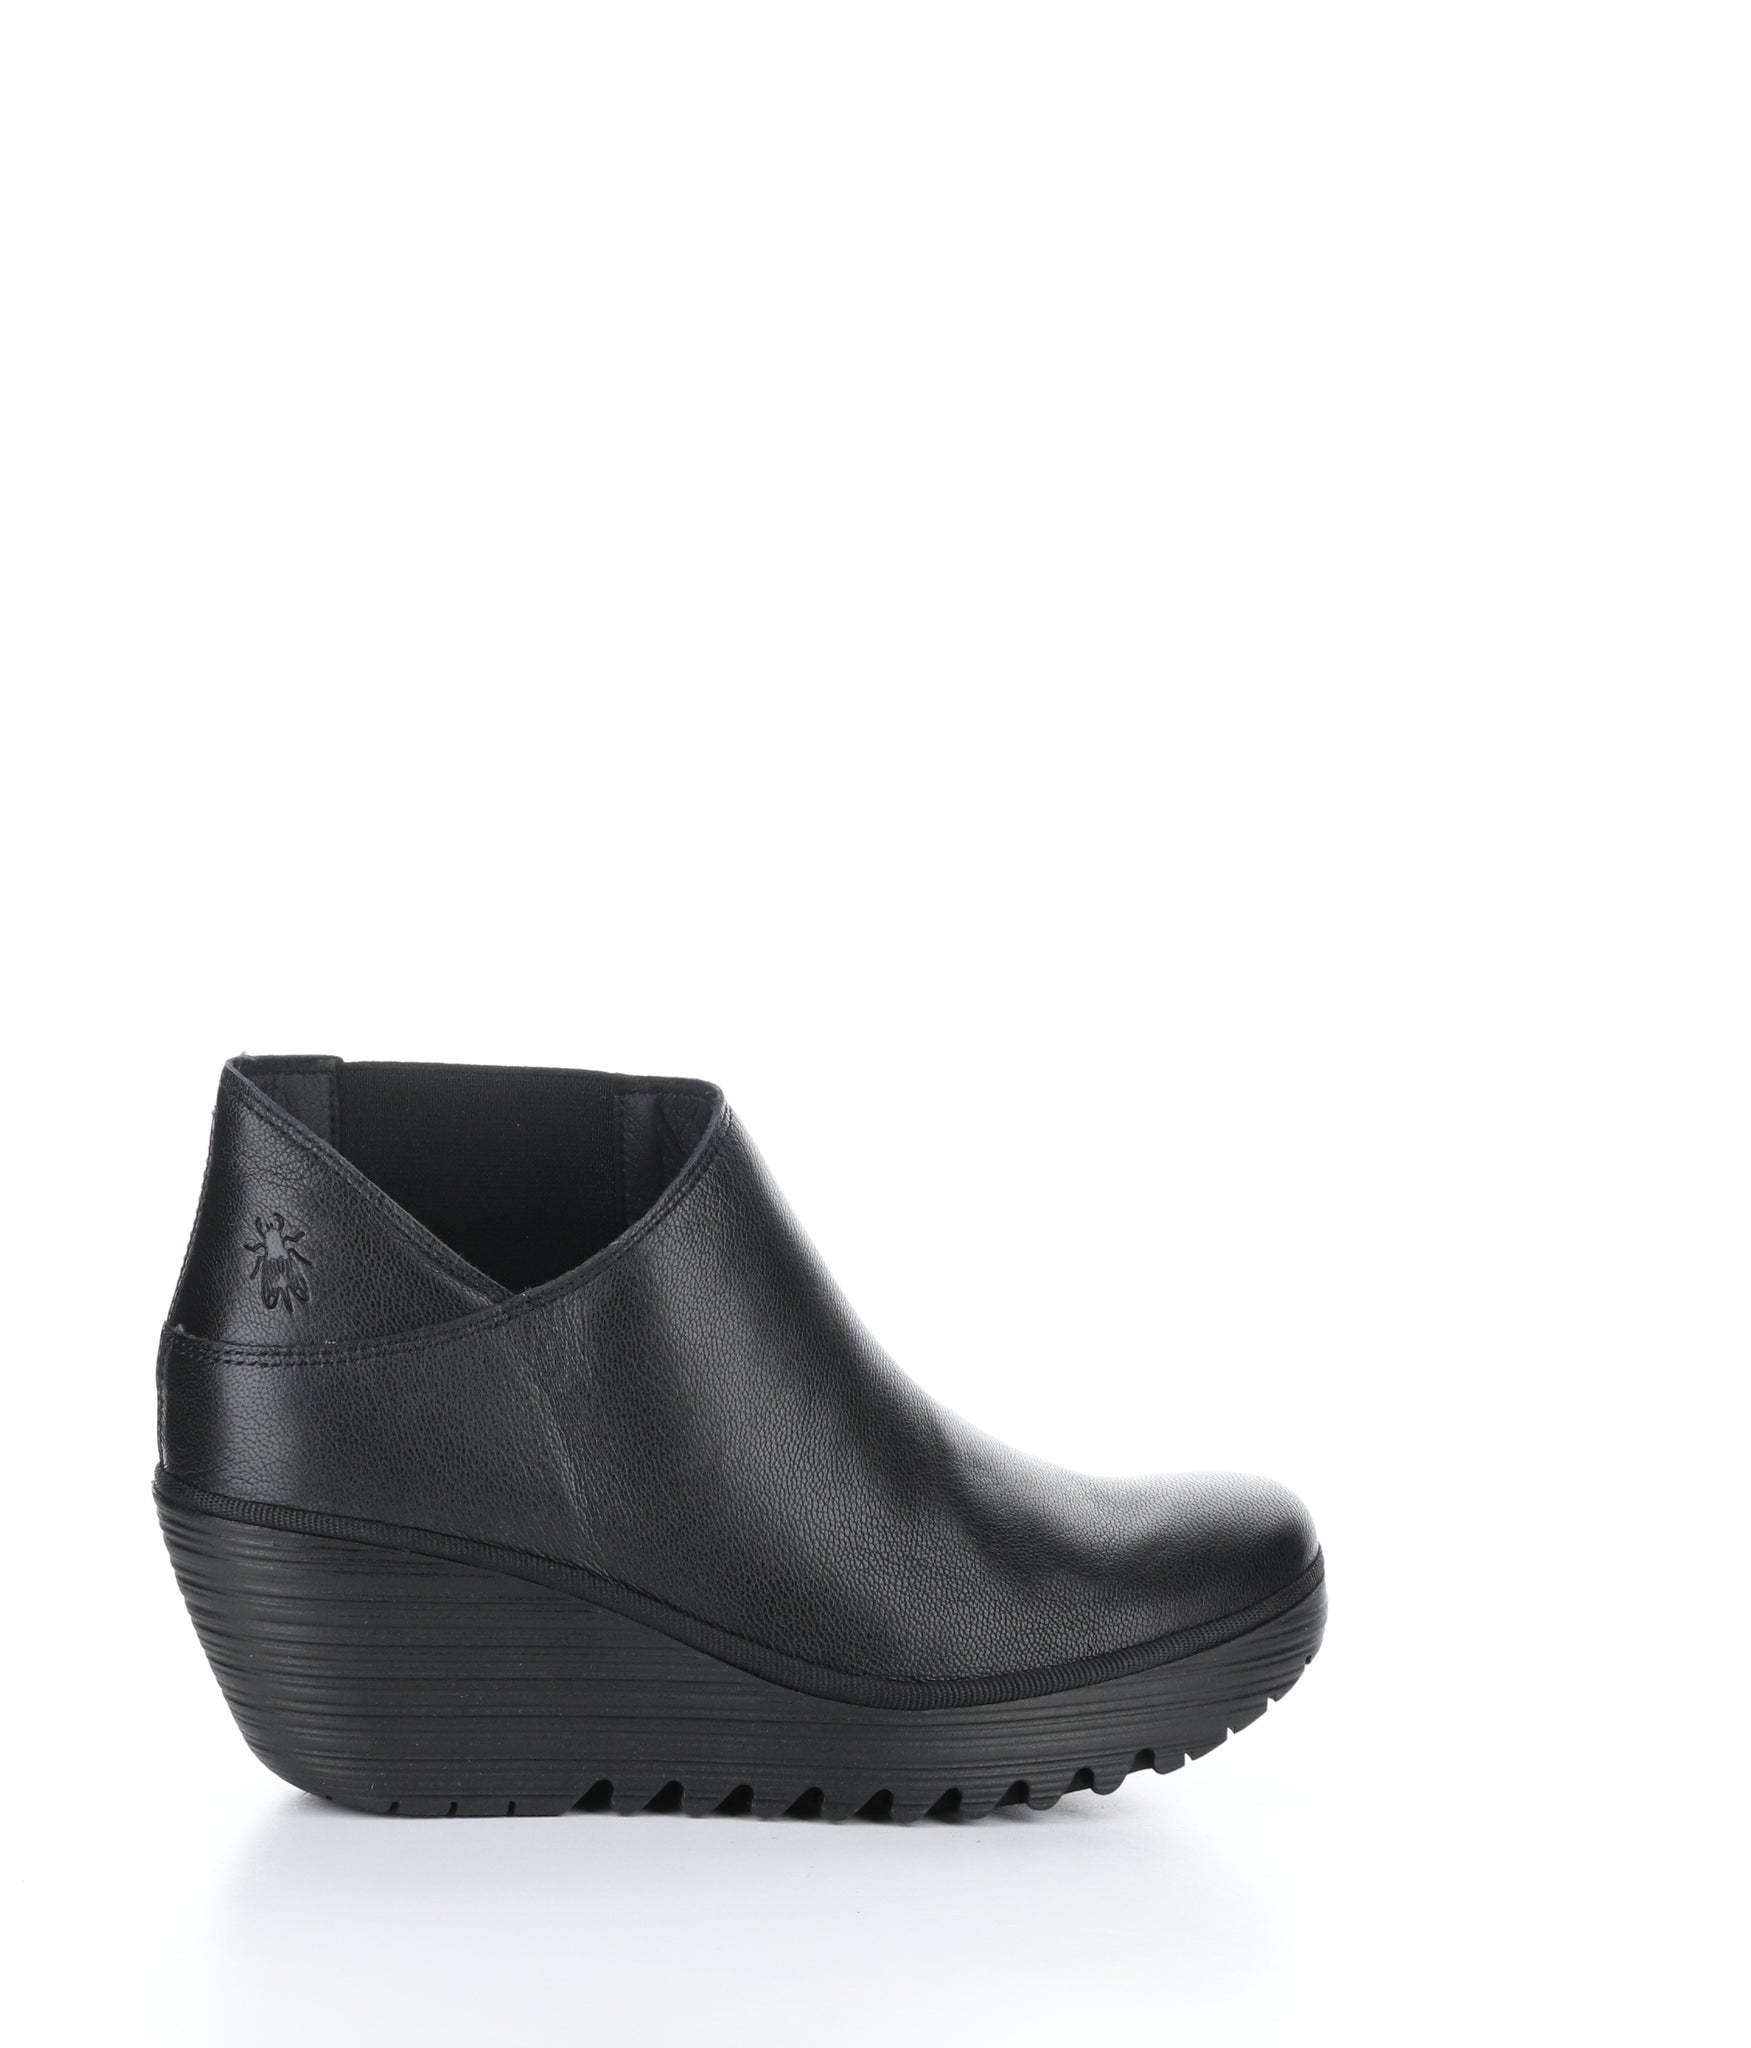 Fly london "Yego" Black leather short bootie with inside elastic